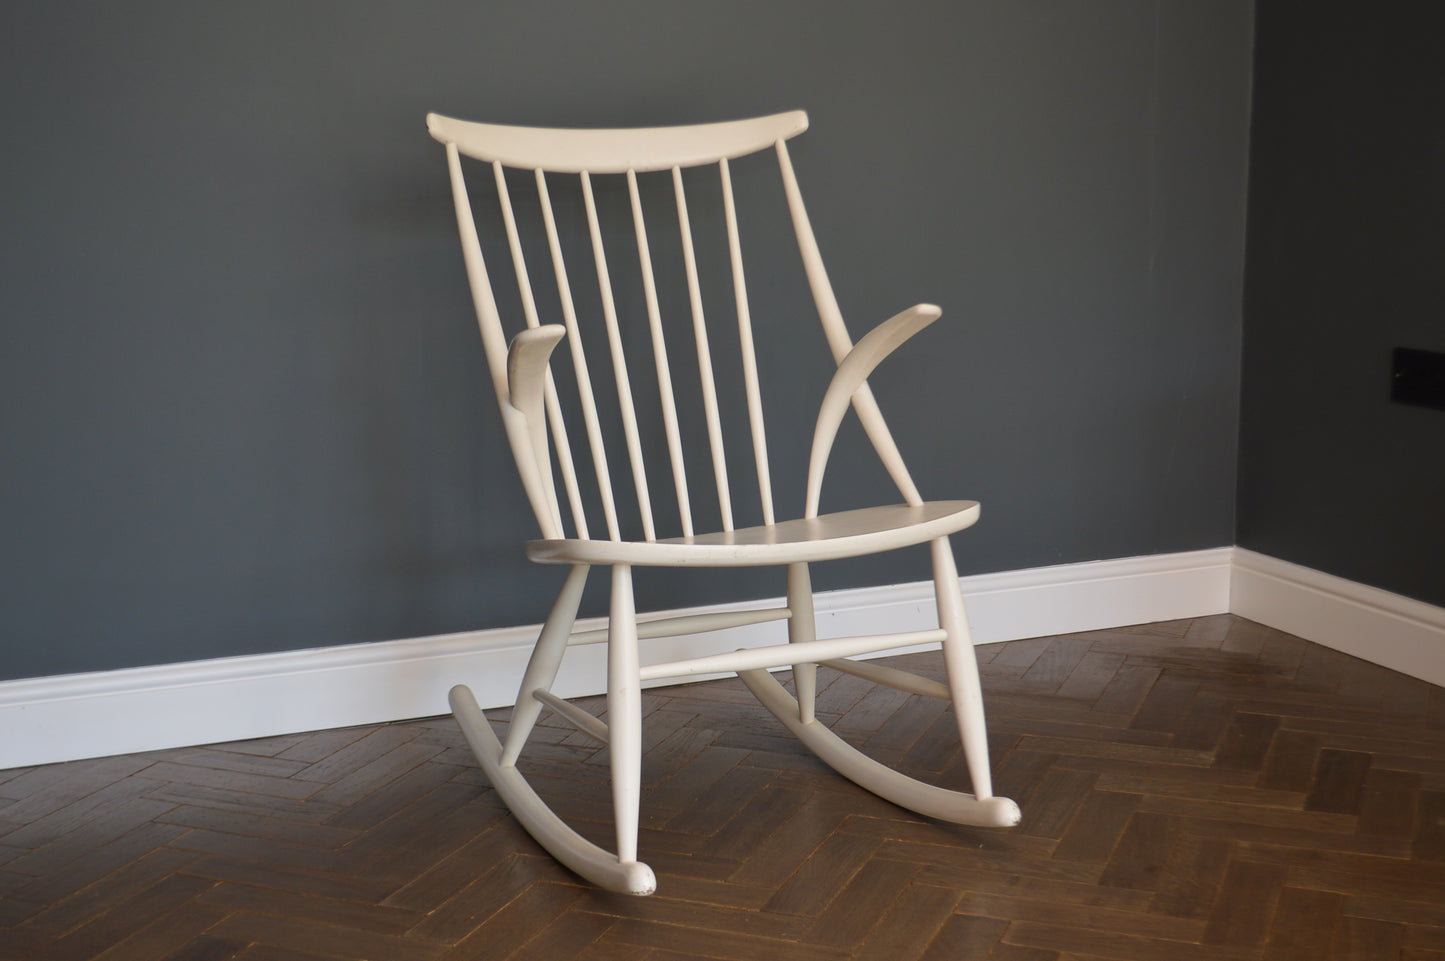 Vintage Danish Rocking Chair By Illum Wikkelso In White, 1960s.